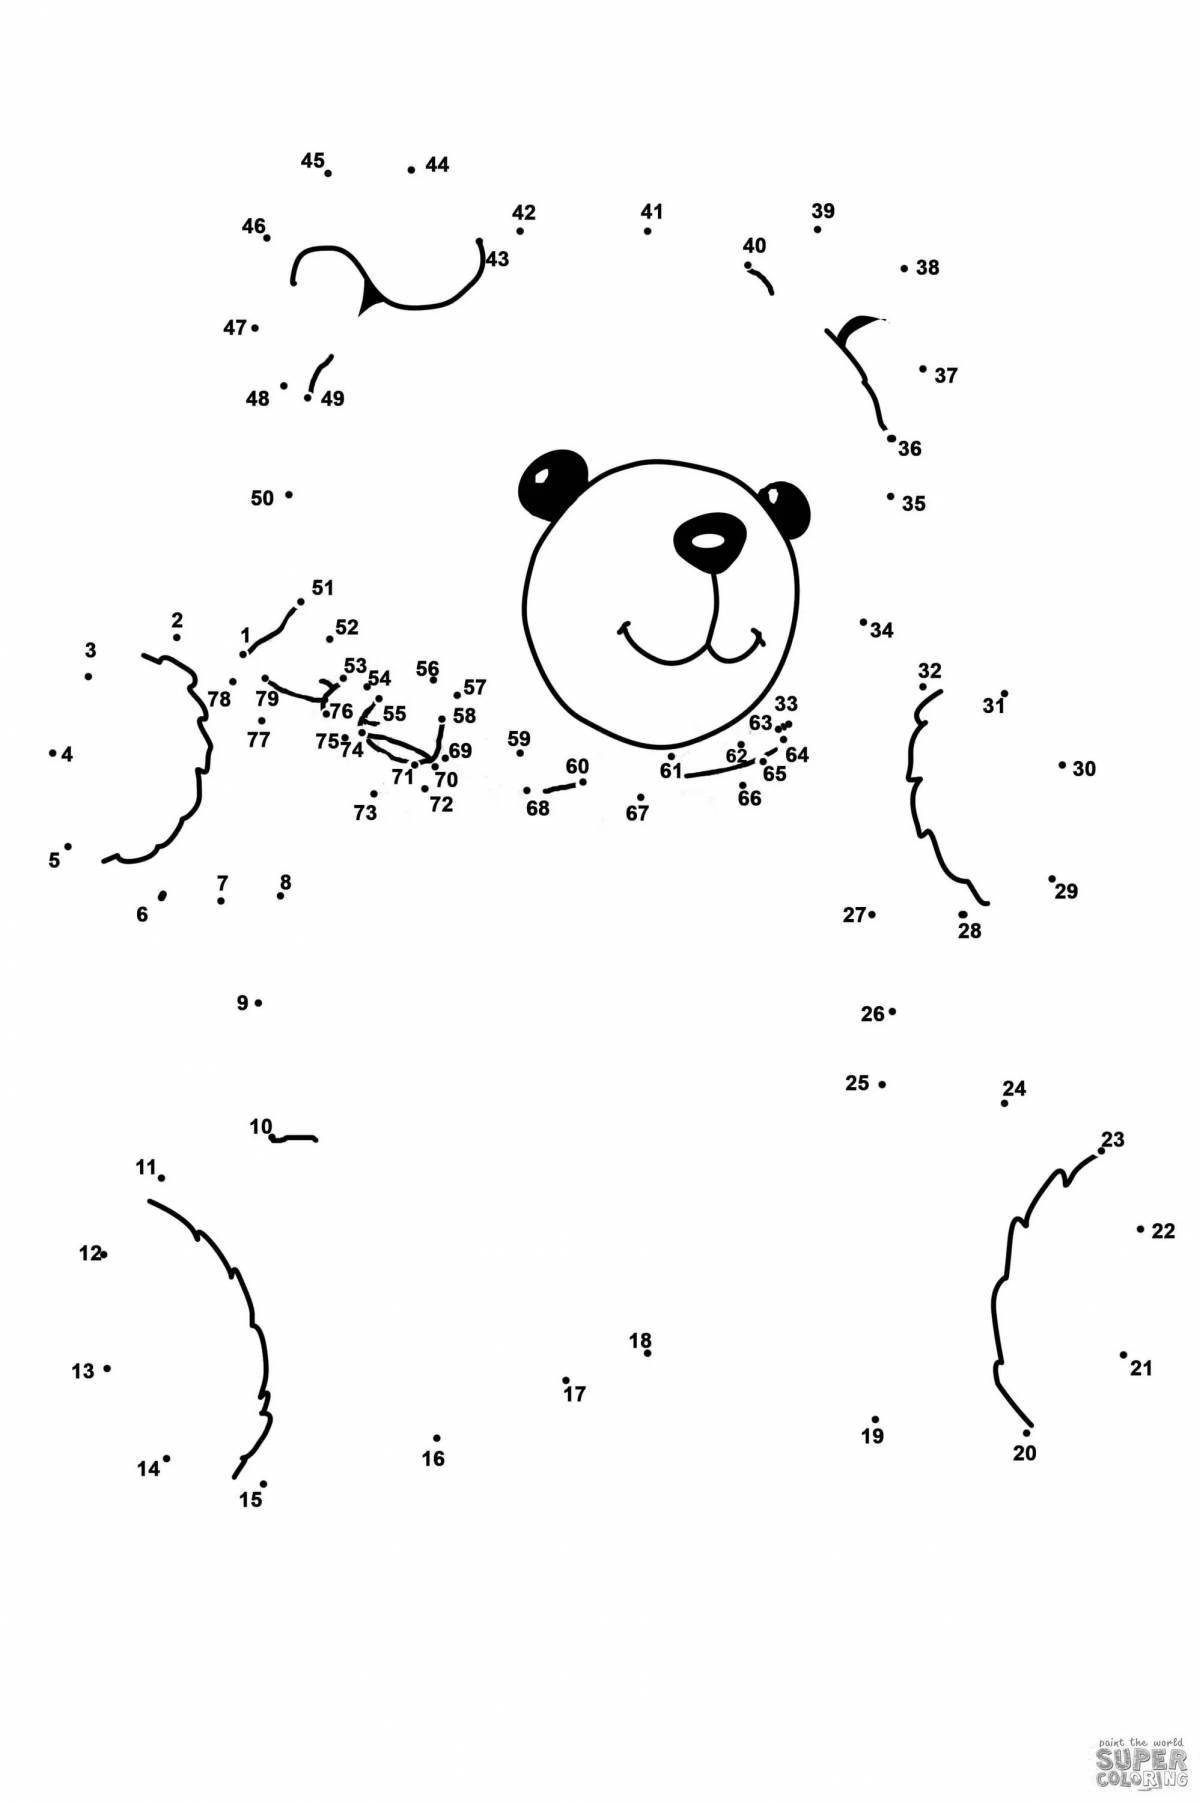 Coloring page of a fascinating bear with polka dots